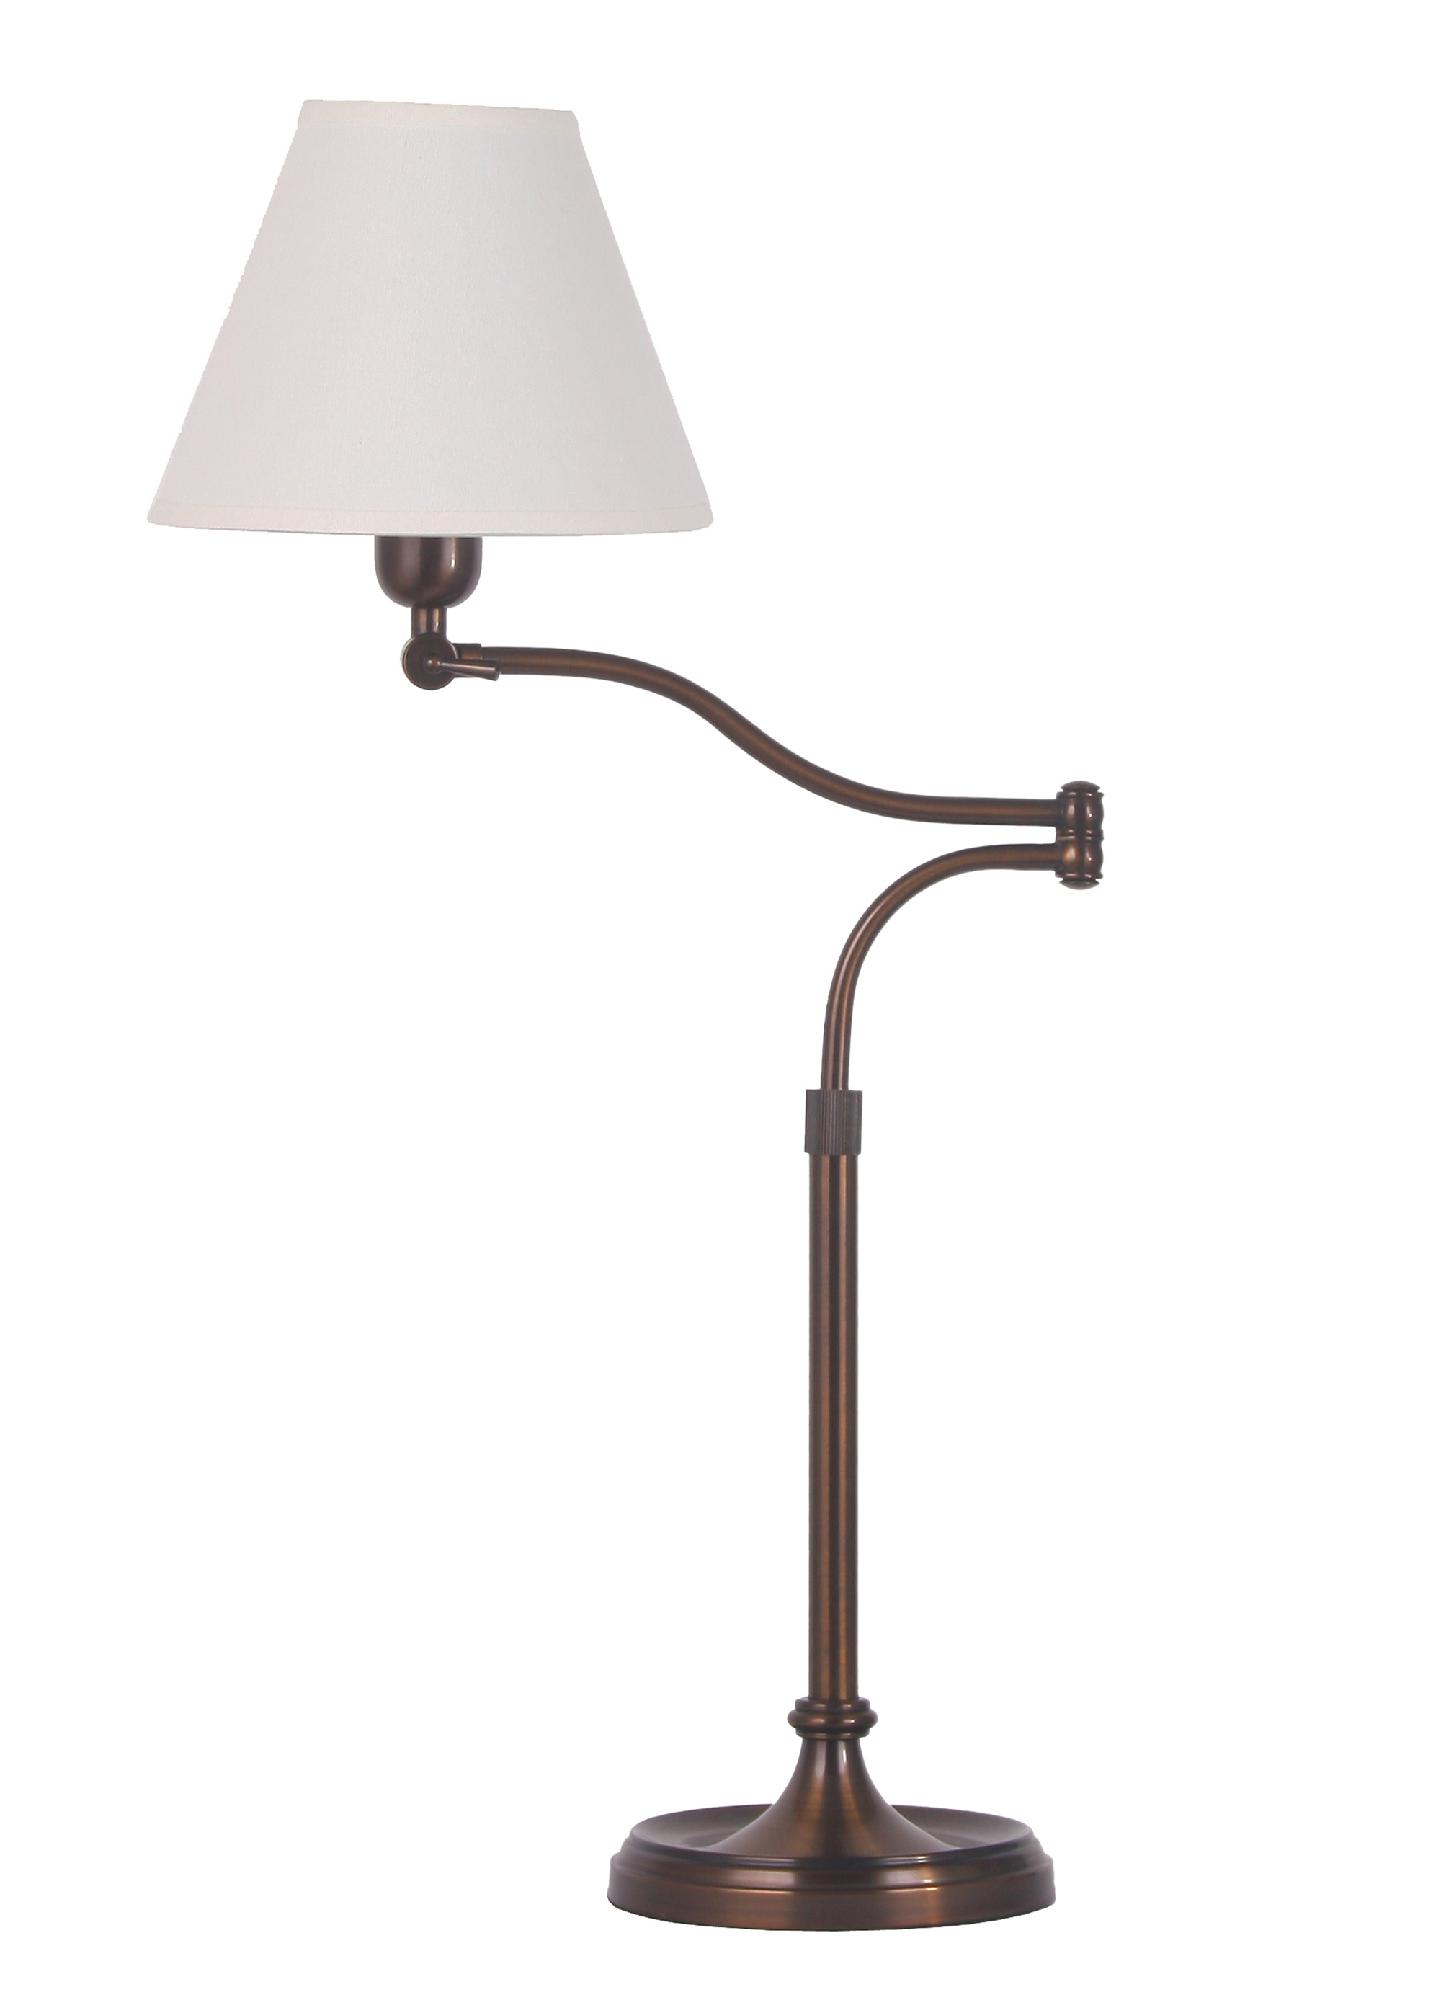 28-33" Adjustable Metal Swing Arm Table Lamp with English Bronze Finish.